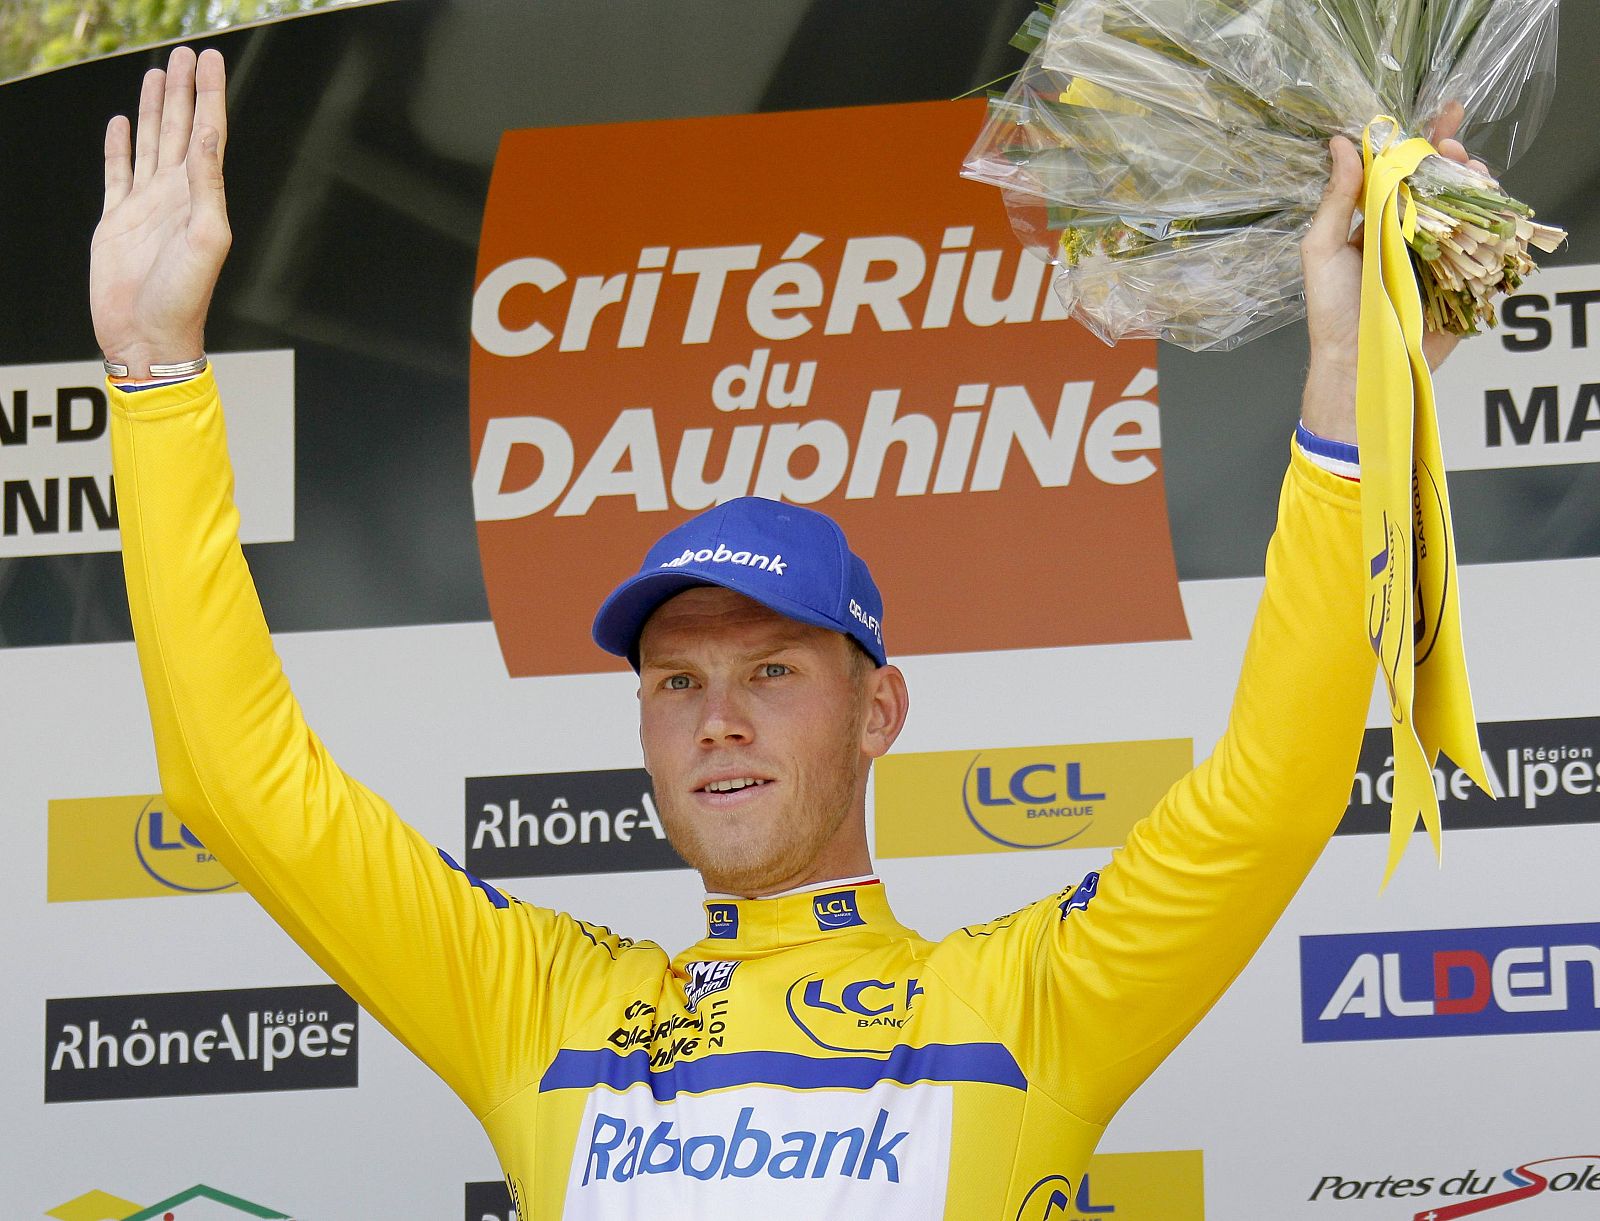 Rabobank's Lars Boom of the Netherlands wears the leader's yellow jersey after winning the individual time trial prologue of the Dauphine cycling race in Saint-Jean-de-Maurienne